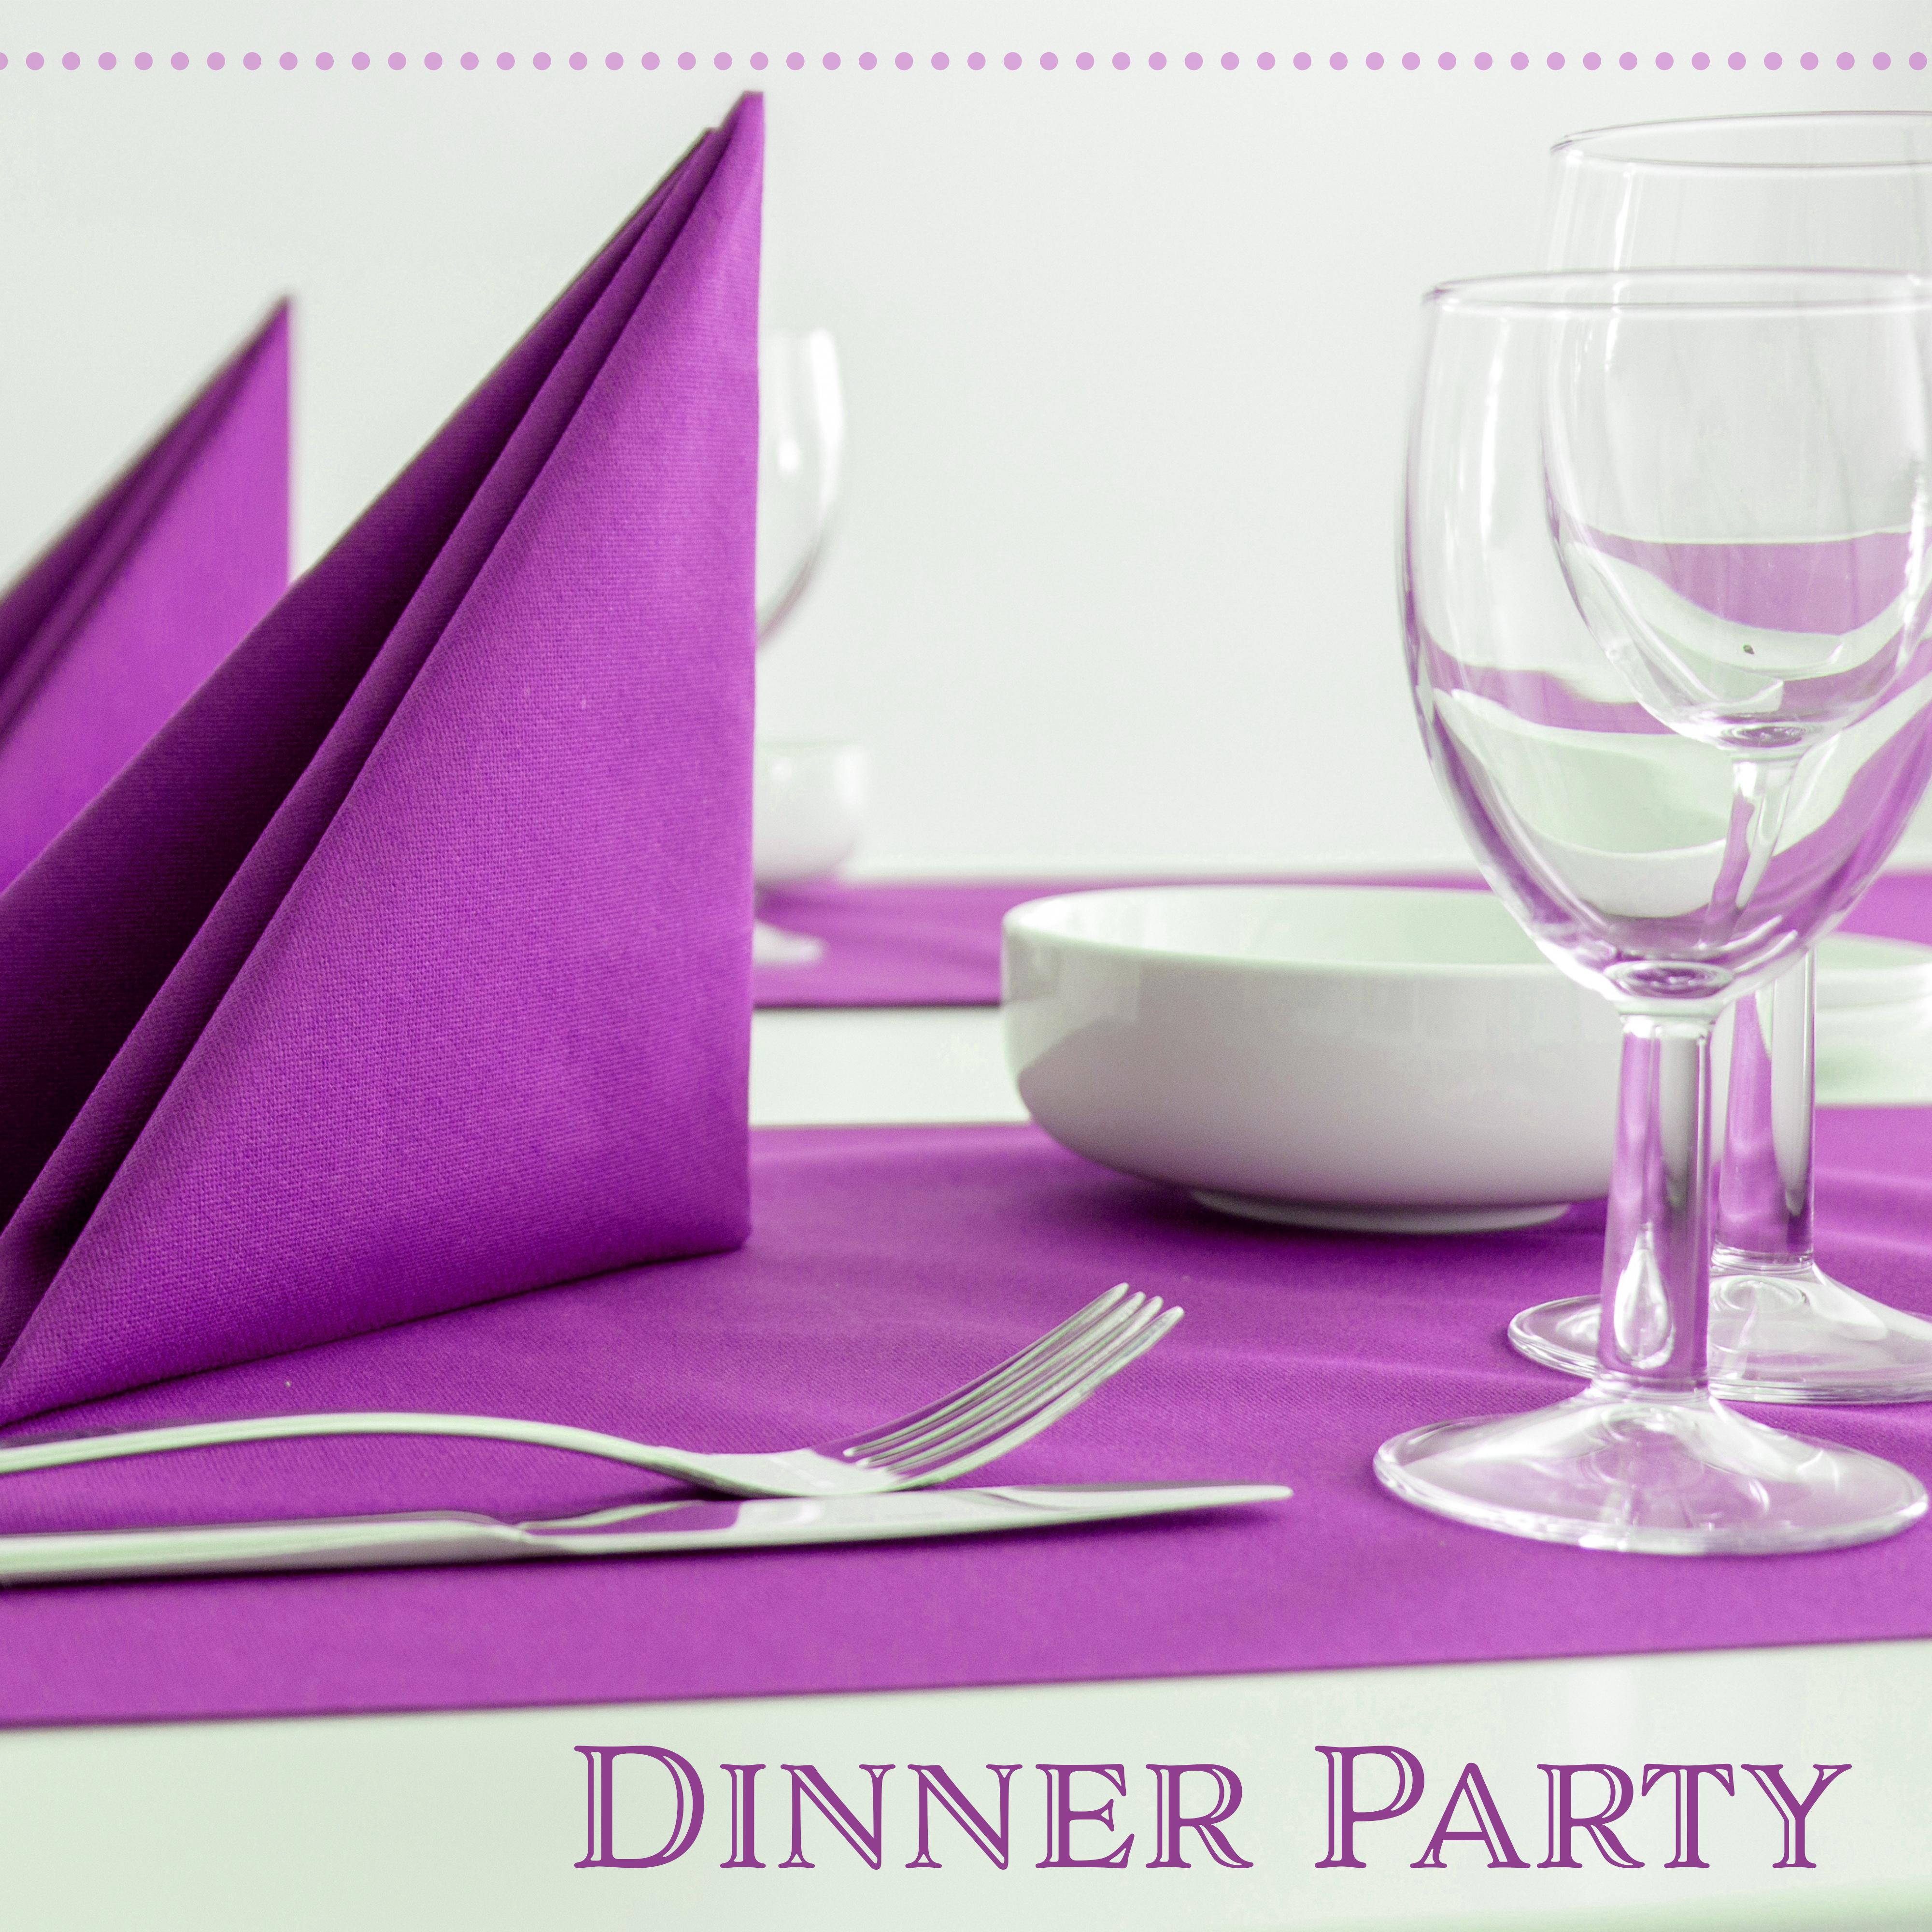 Dinner Party  Instrumental Music for Dinner at Restaurant, Smooth Jazz, Relaxed Piano